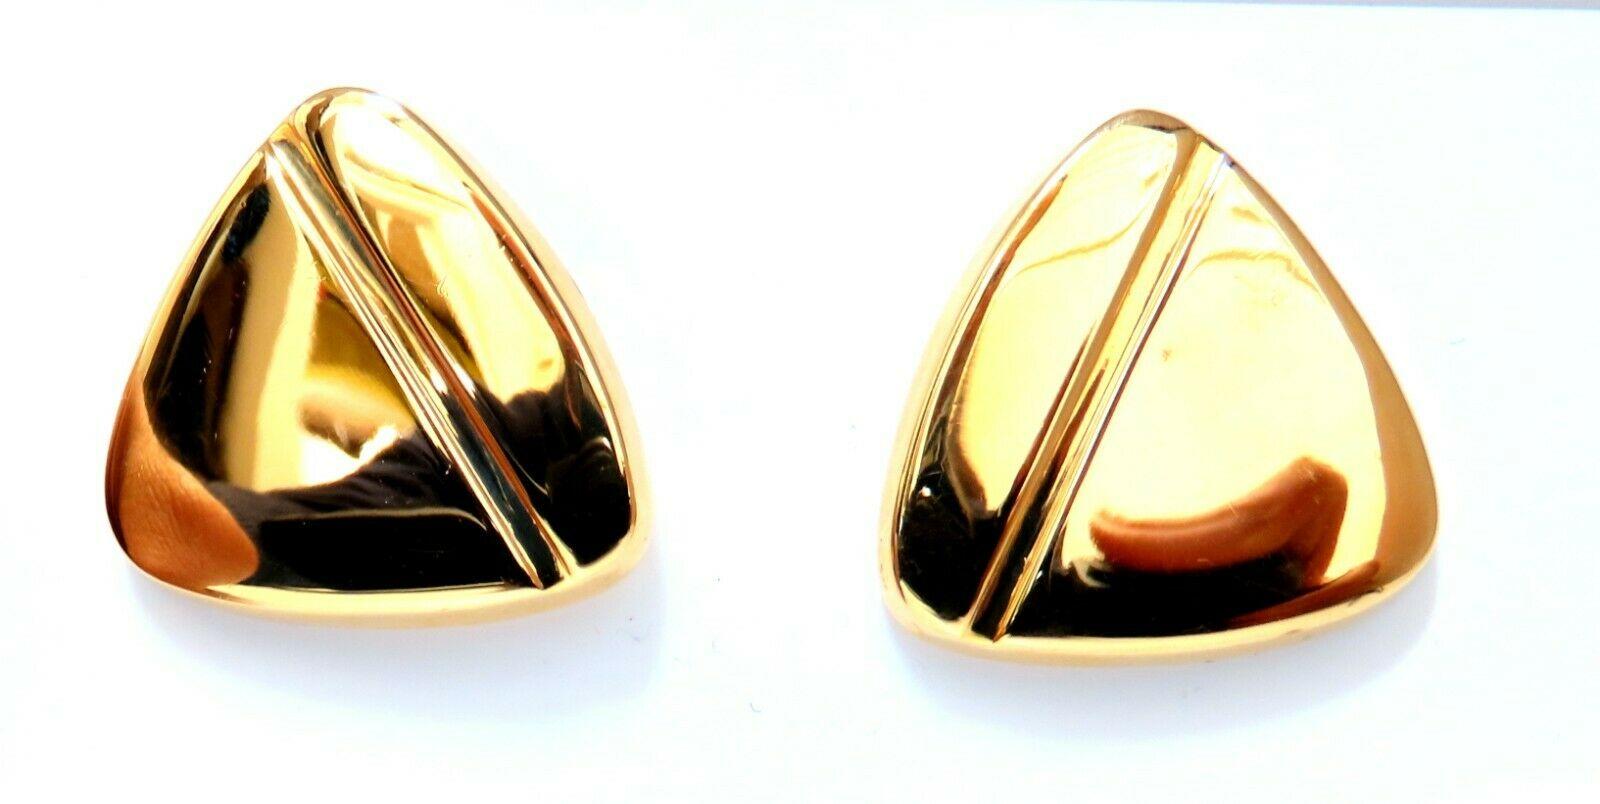 Triangular Button Earrings

Measurements of Earrings:

25 x 25mm 

7.3 grams / 14kt. yellow gold

Earrings are gorgeous made